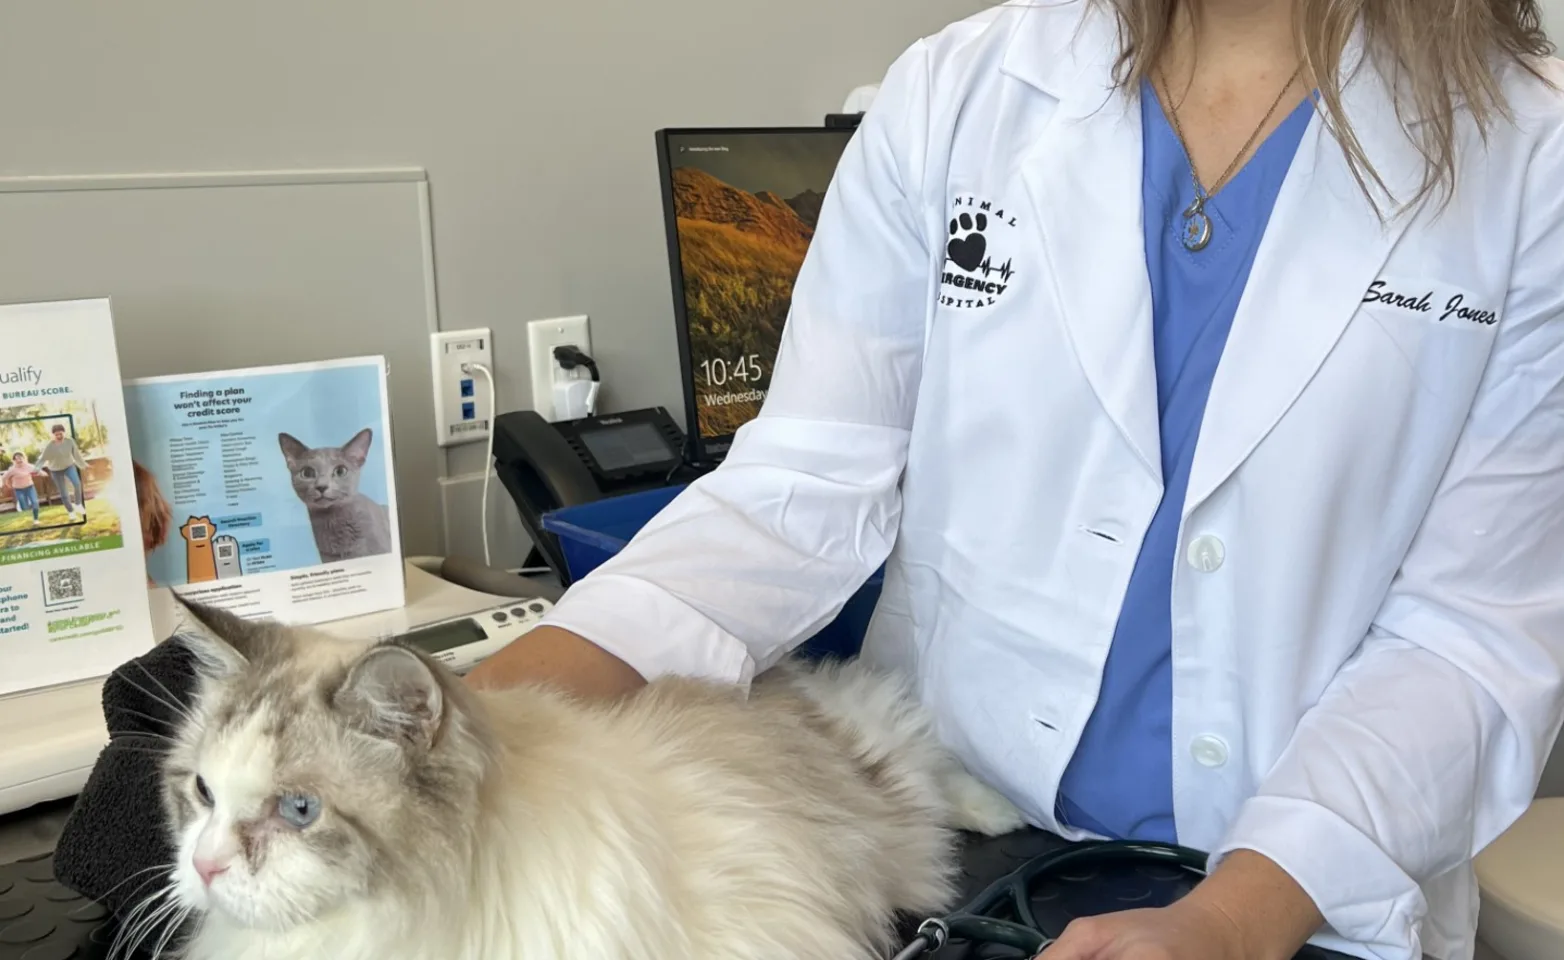 A doctor standing next to a white and grey fluffy cat laying on an exam table